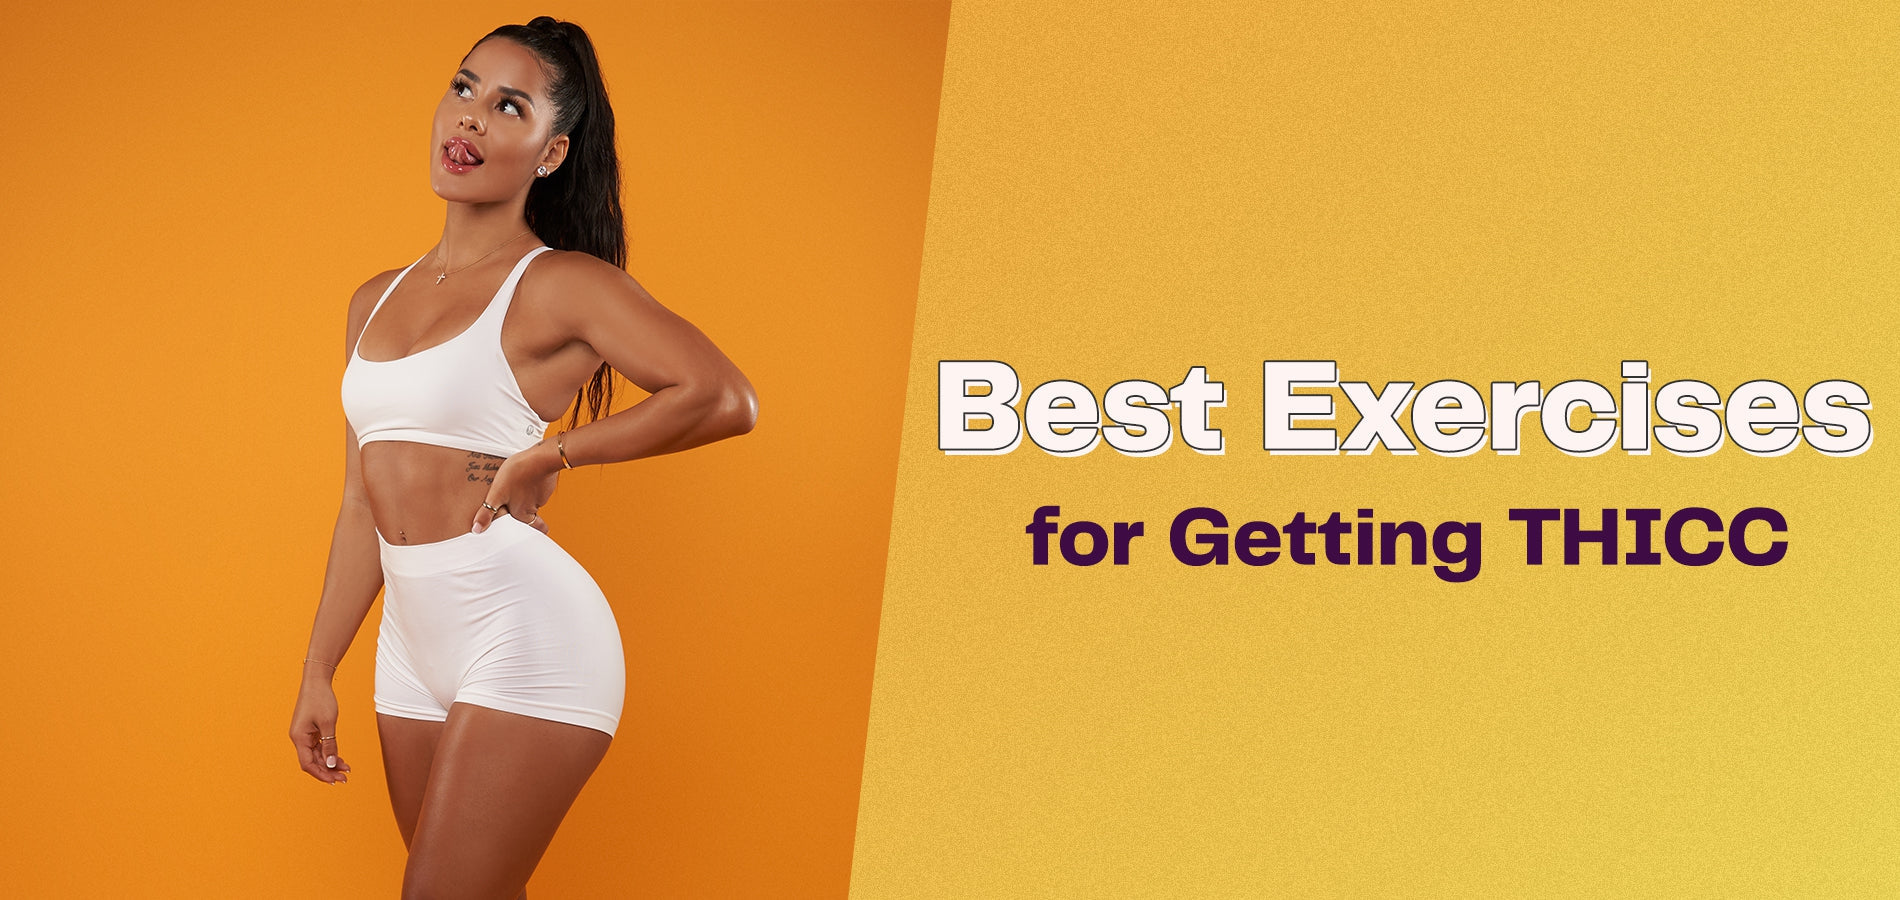 Best Exercises for Getting THICC-WBK FIT